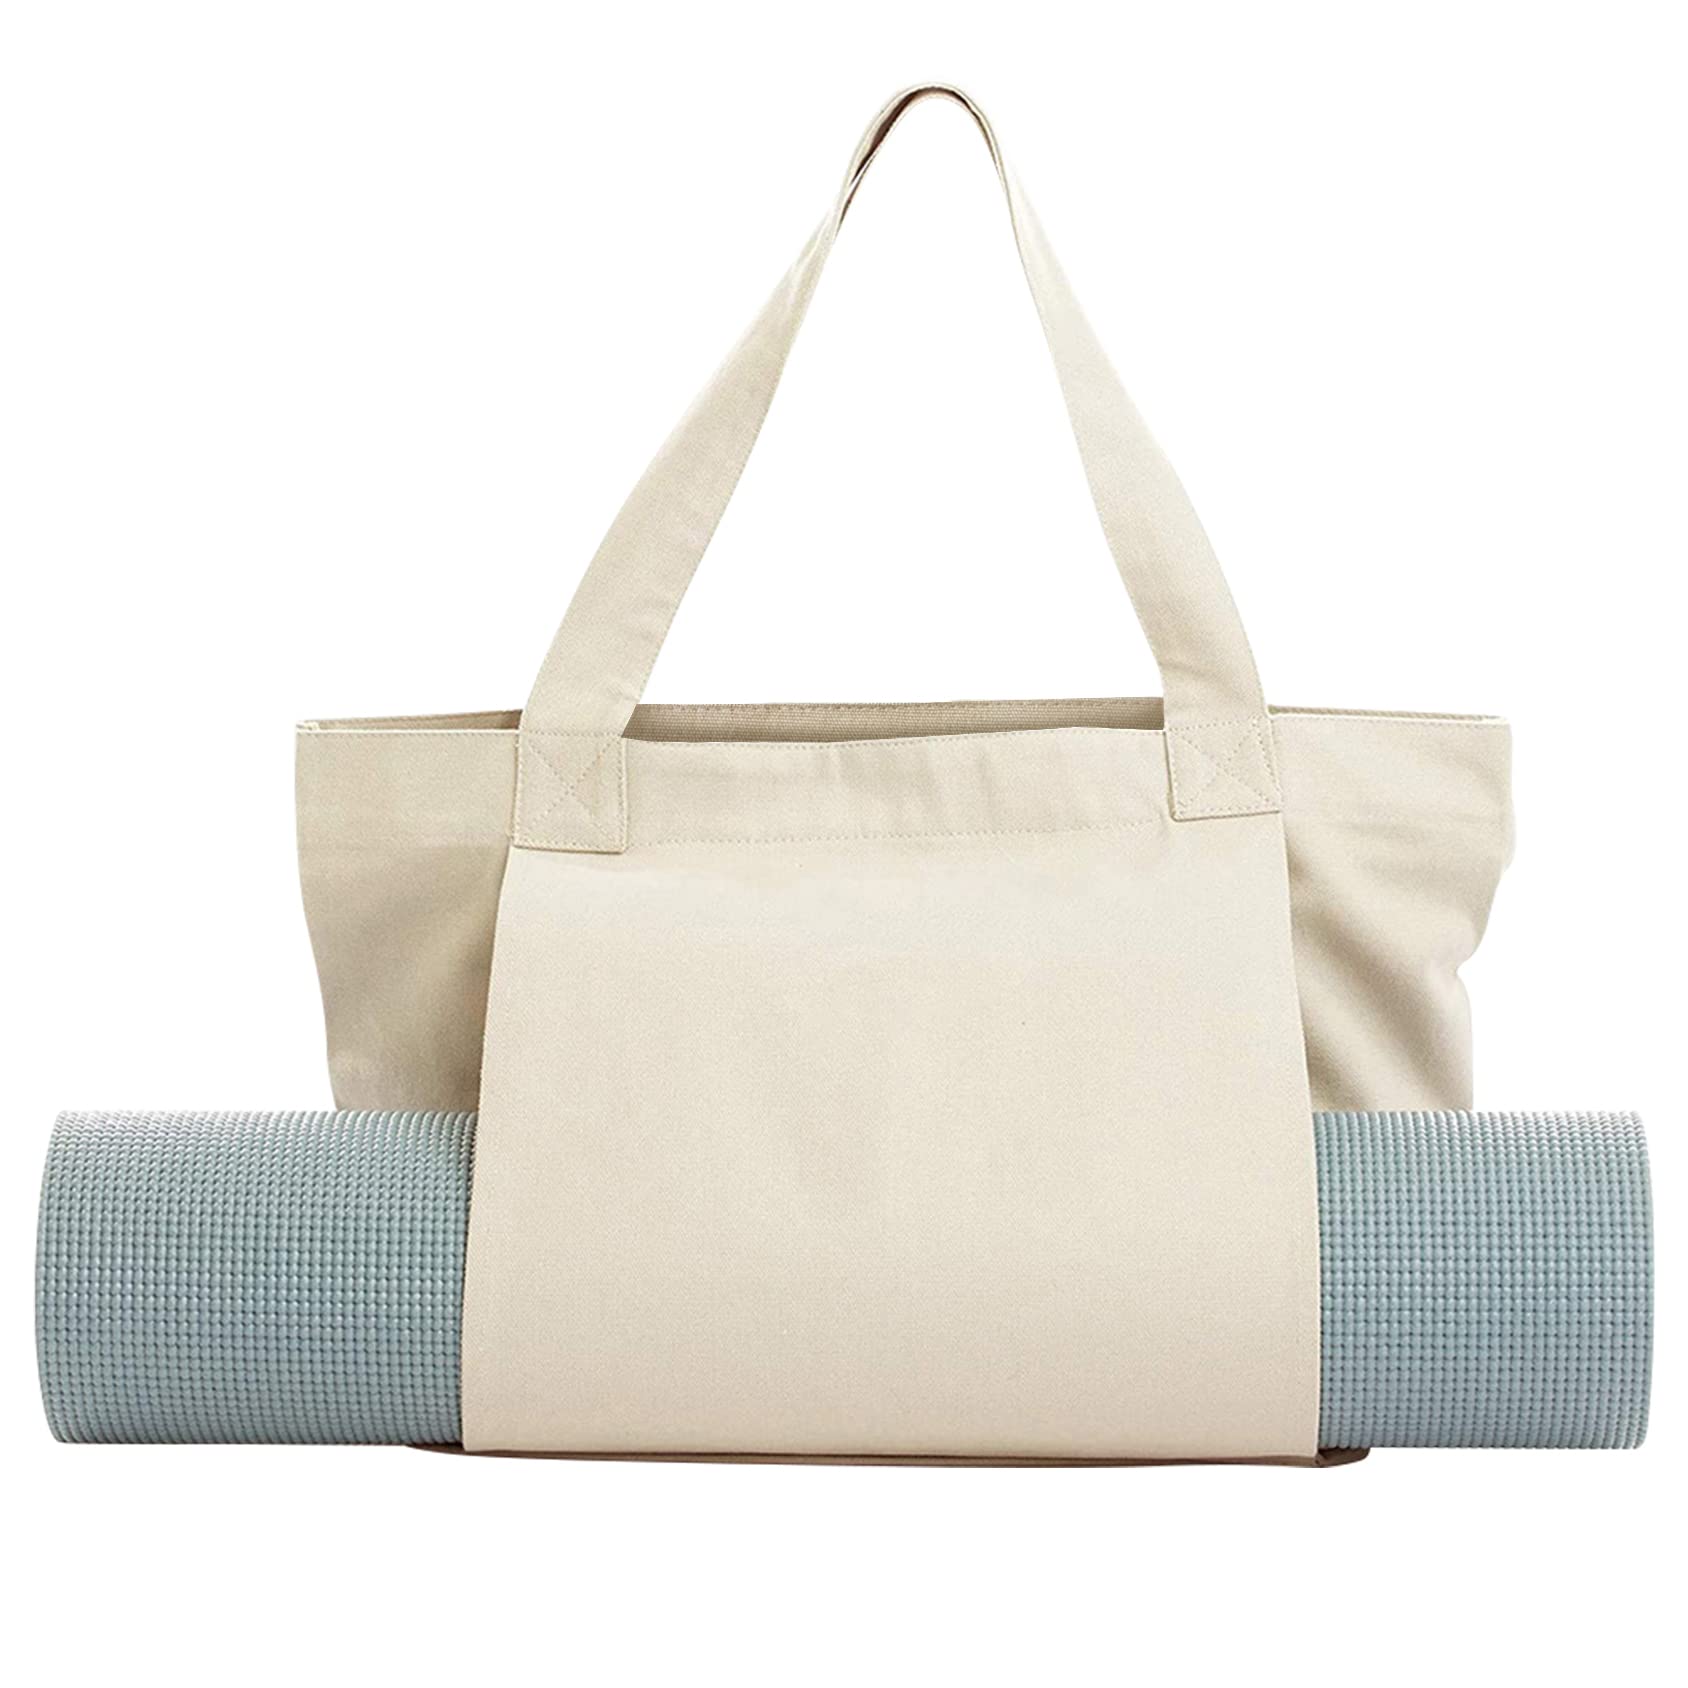  Yoga Mat Bags and Carriers Fits All Your Stuff, Yoga